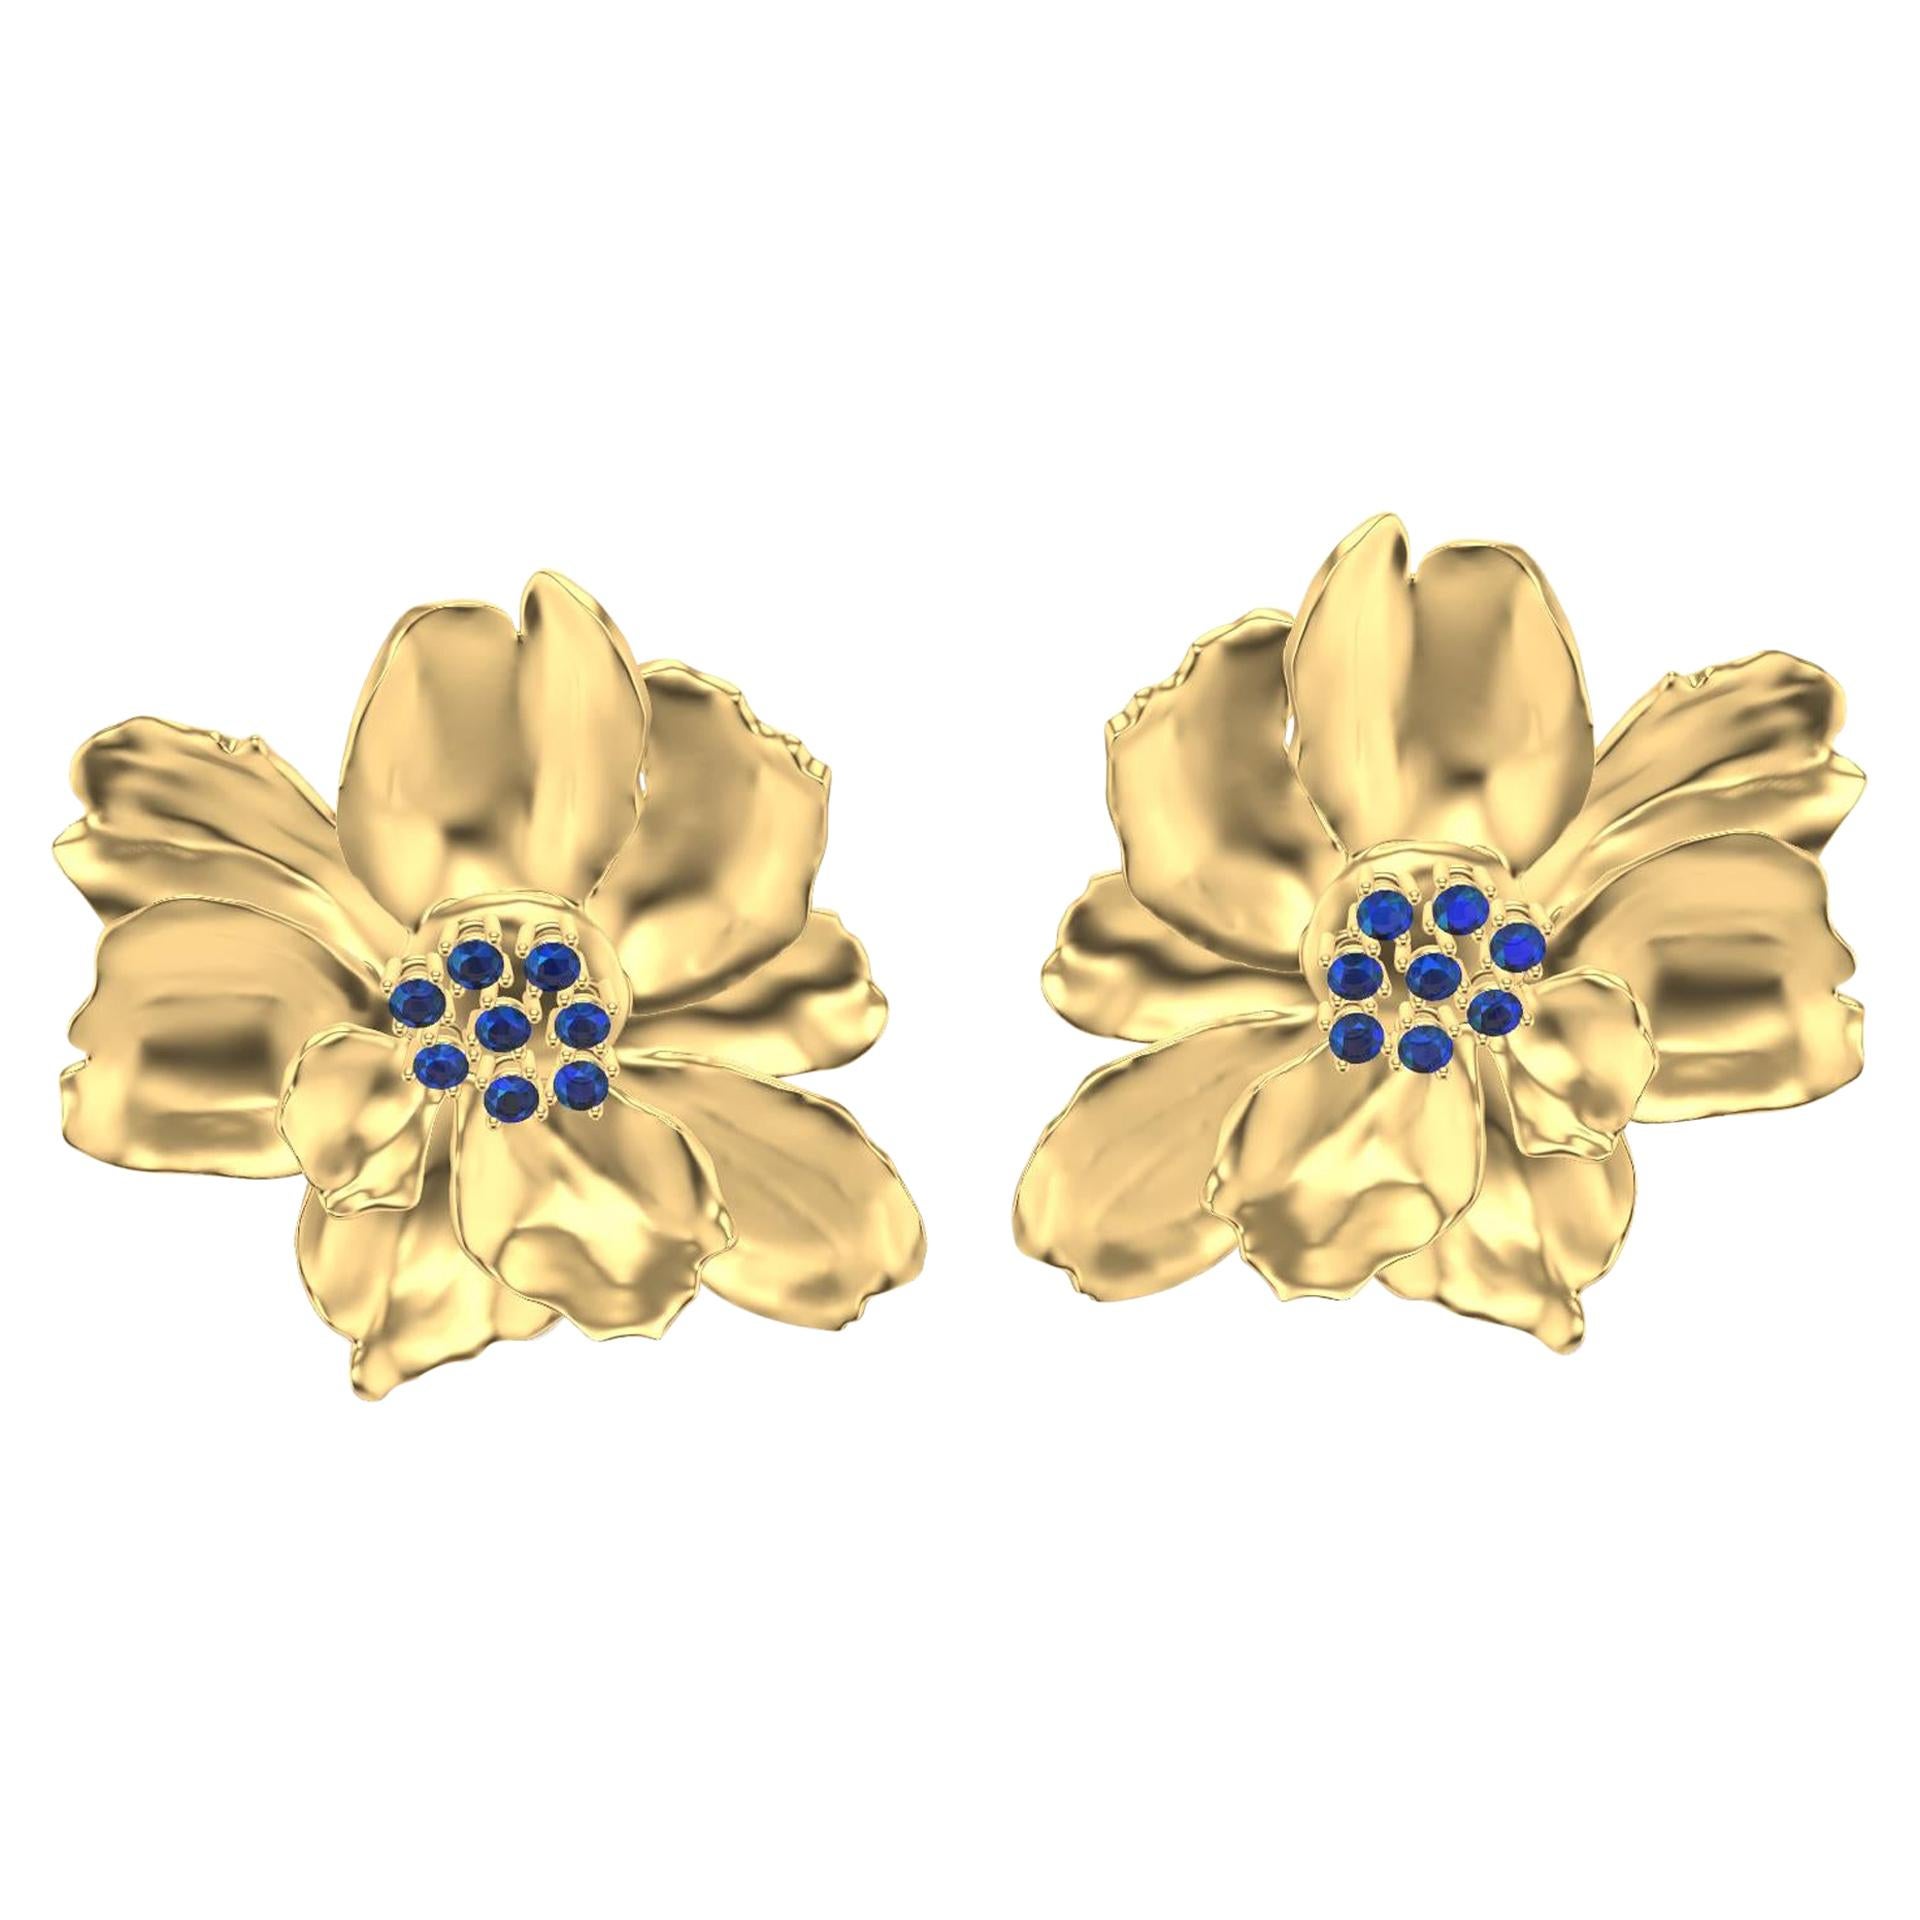 18 Karat Yellow Gold Wild Flower Earrings with Sapphires